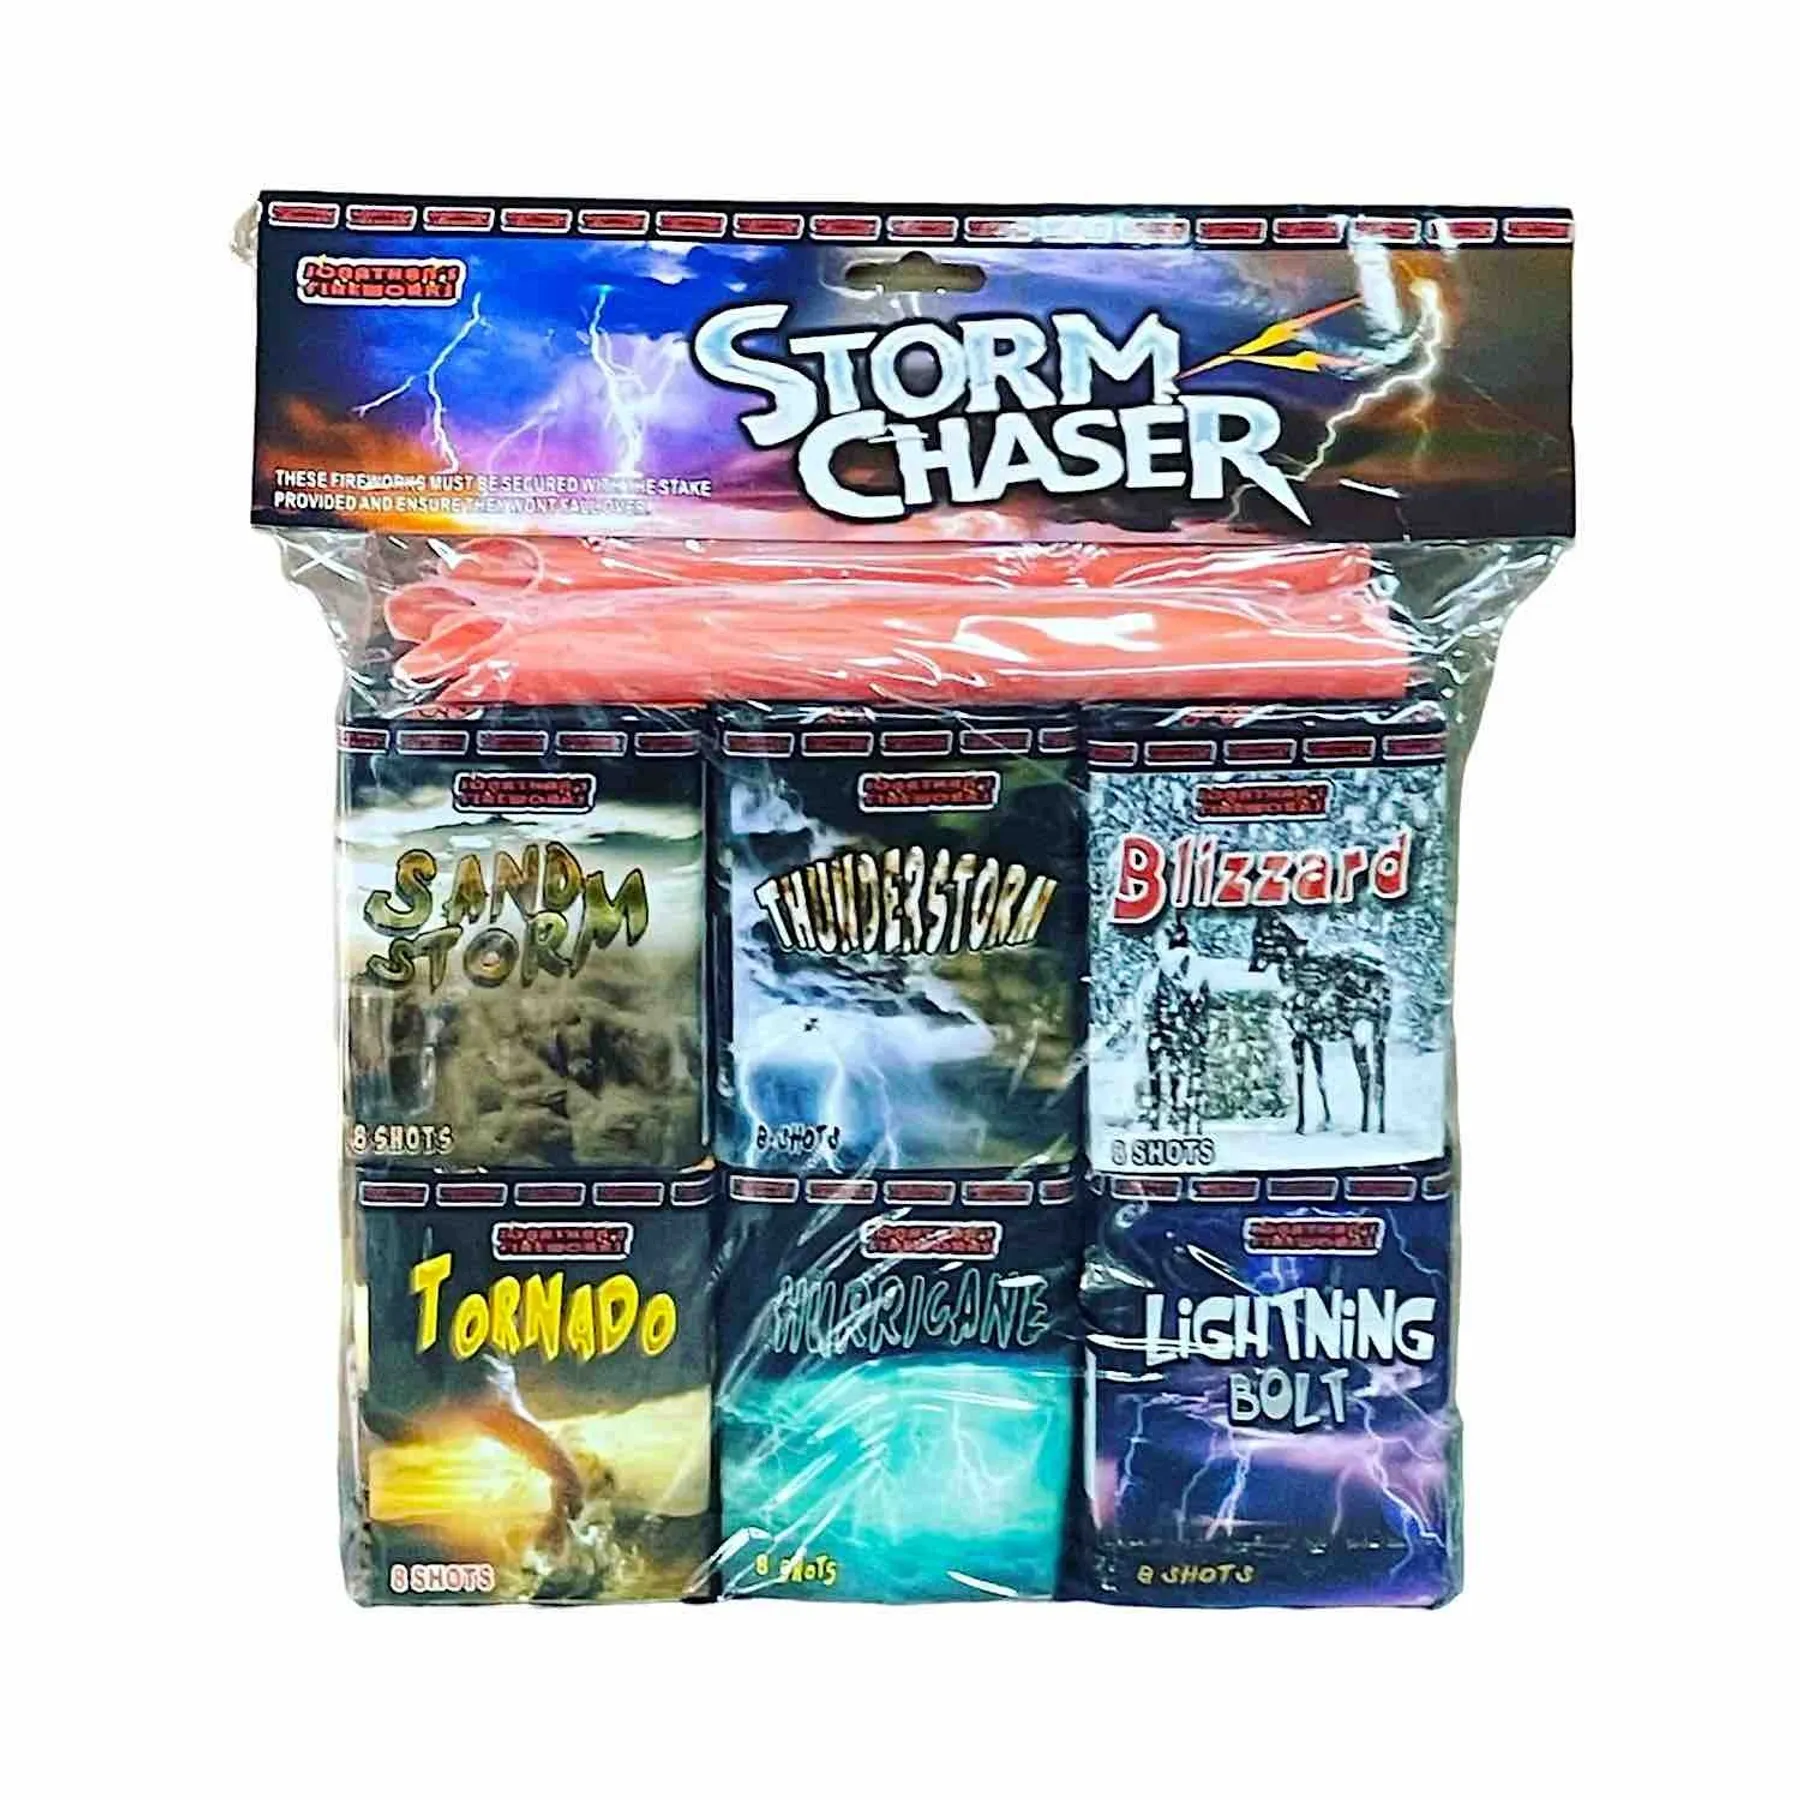 Storm Chaser single pack